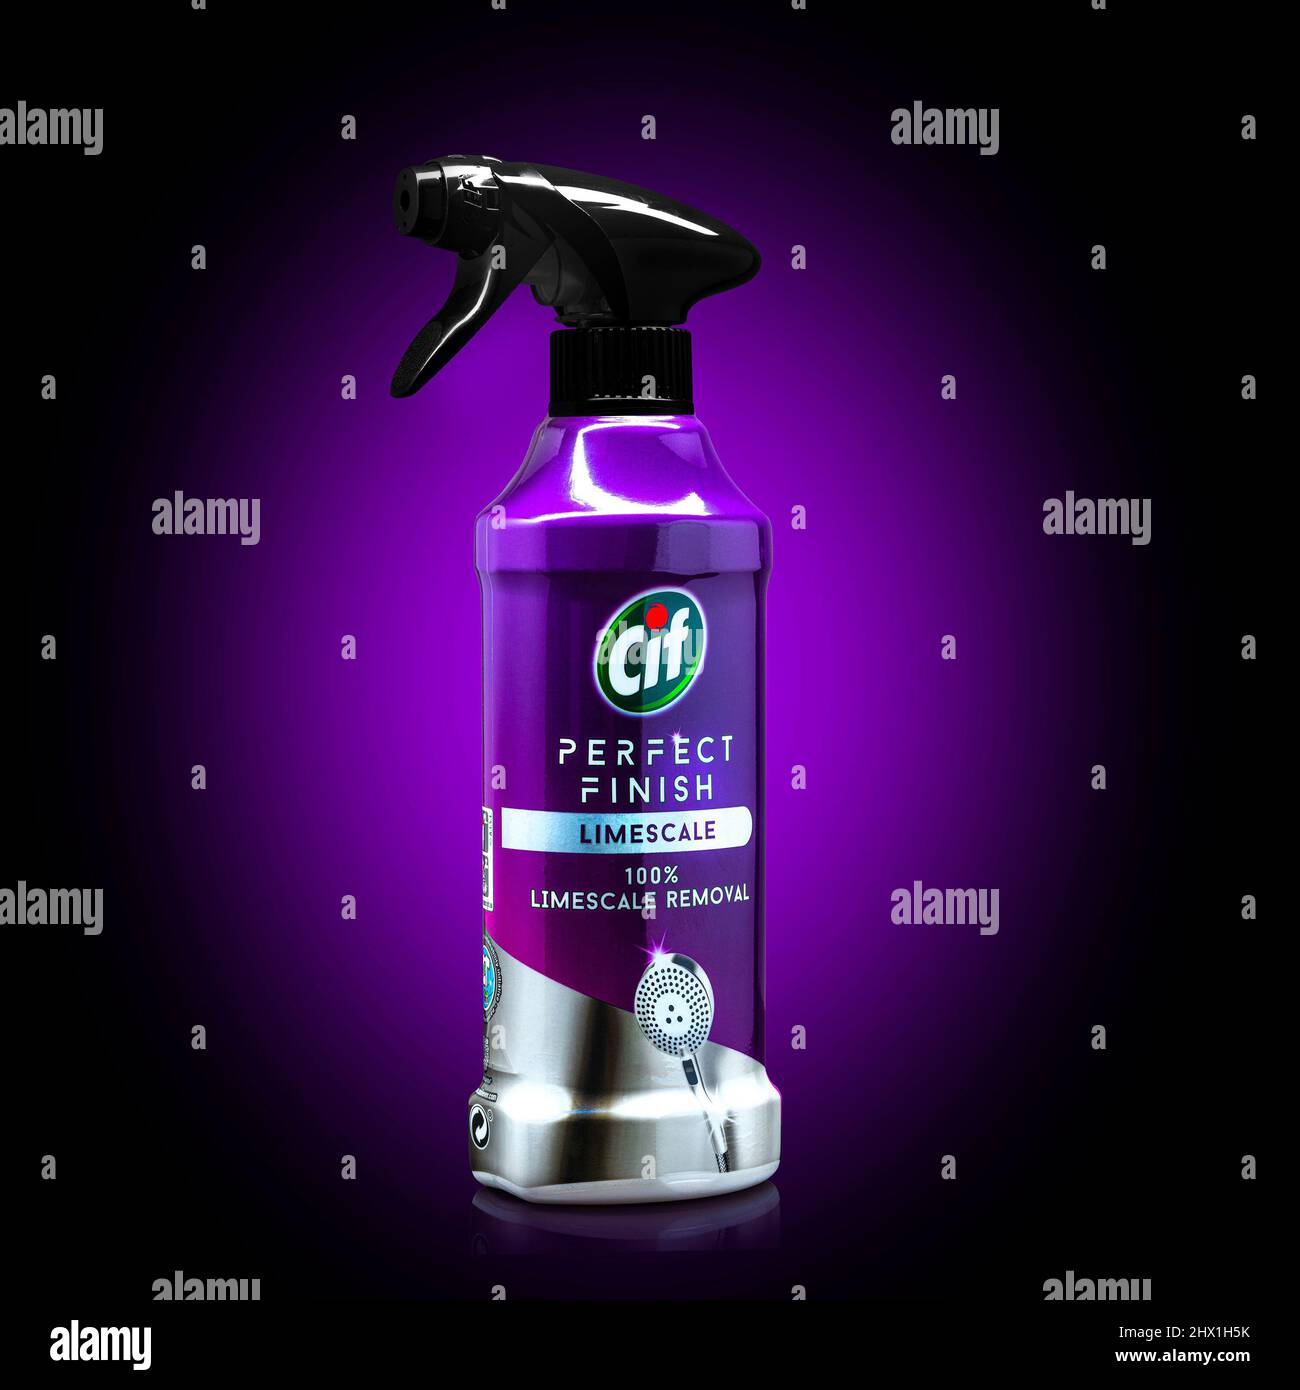 POZNAN, POLAND - Nov 25, 2017: The Cif Cream cleaning product for kitchen  and bathroom in a plastic bottle Stock Photo - Alamy